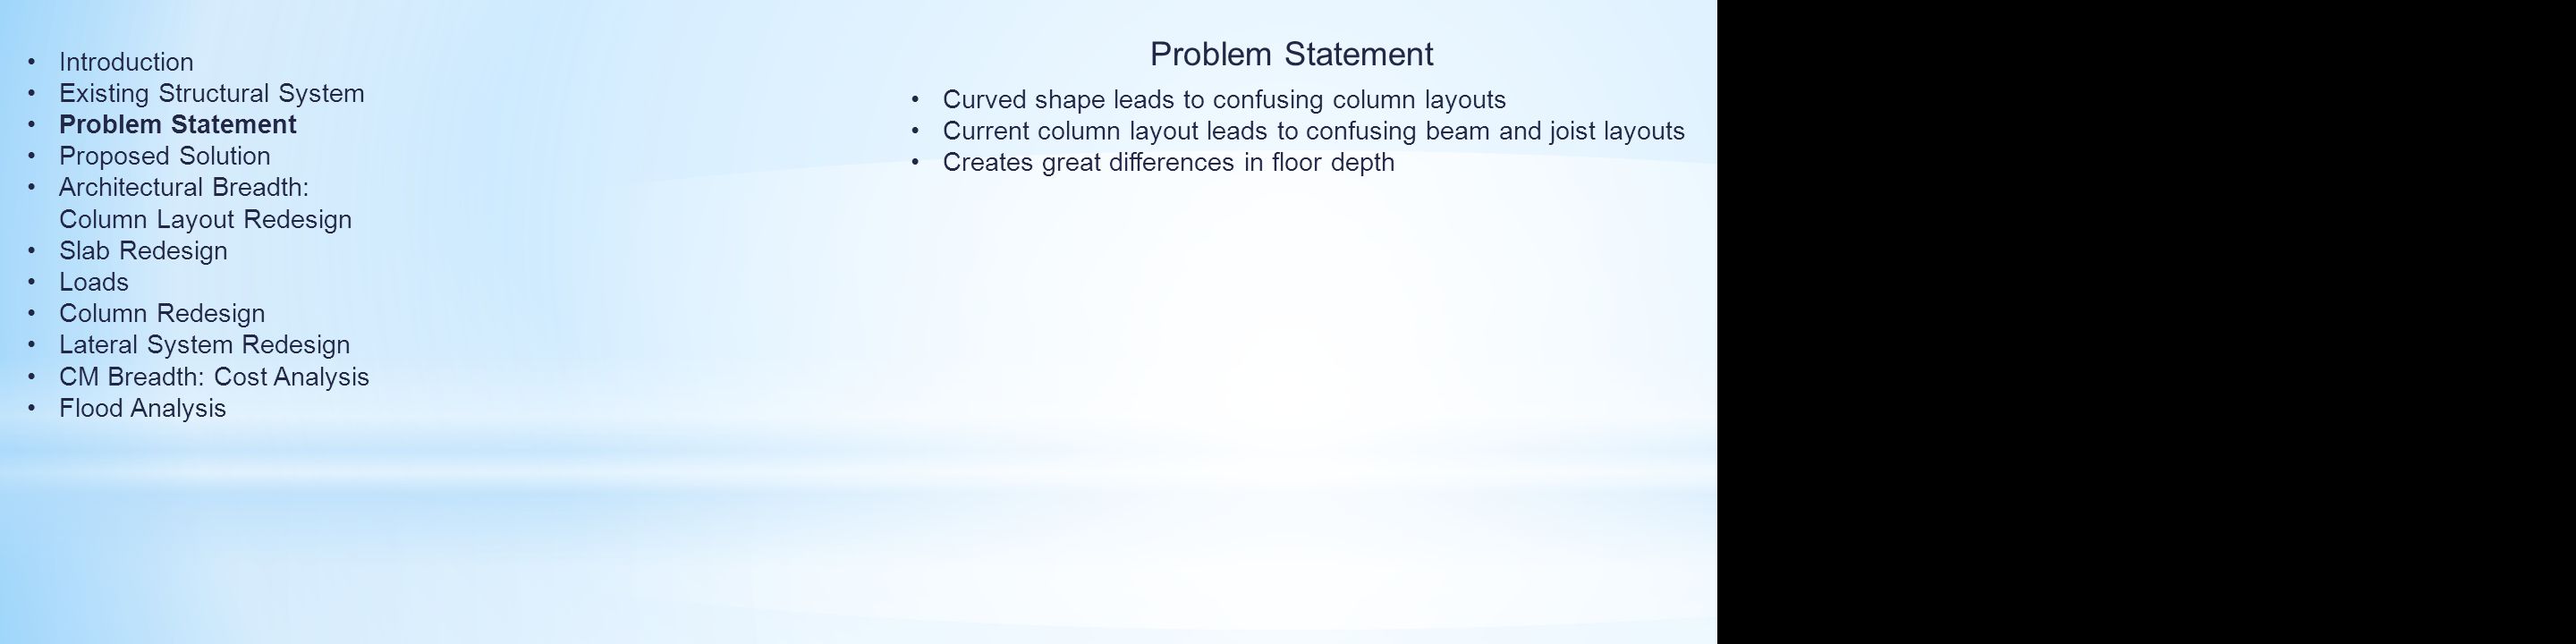 Problem Statement Curved shape leads to confusing column layouts Current column layout leads to confusing beam and joist layouts Creates great differences in floor depth Introduction Existing Structural System Problem Statement Proposed Solution Architectural Breadth: Column Layout Redesign Slab Redesign Loads Column Redesign Lateral System Redesign CM Breadth: Cost Analysis Flood Analysis